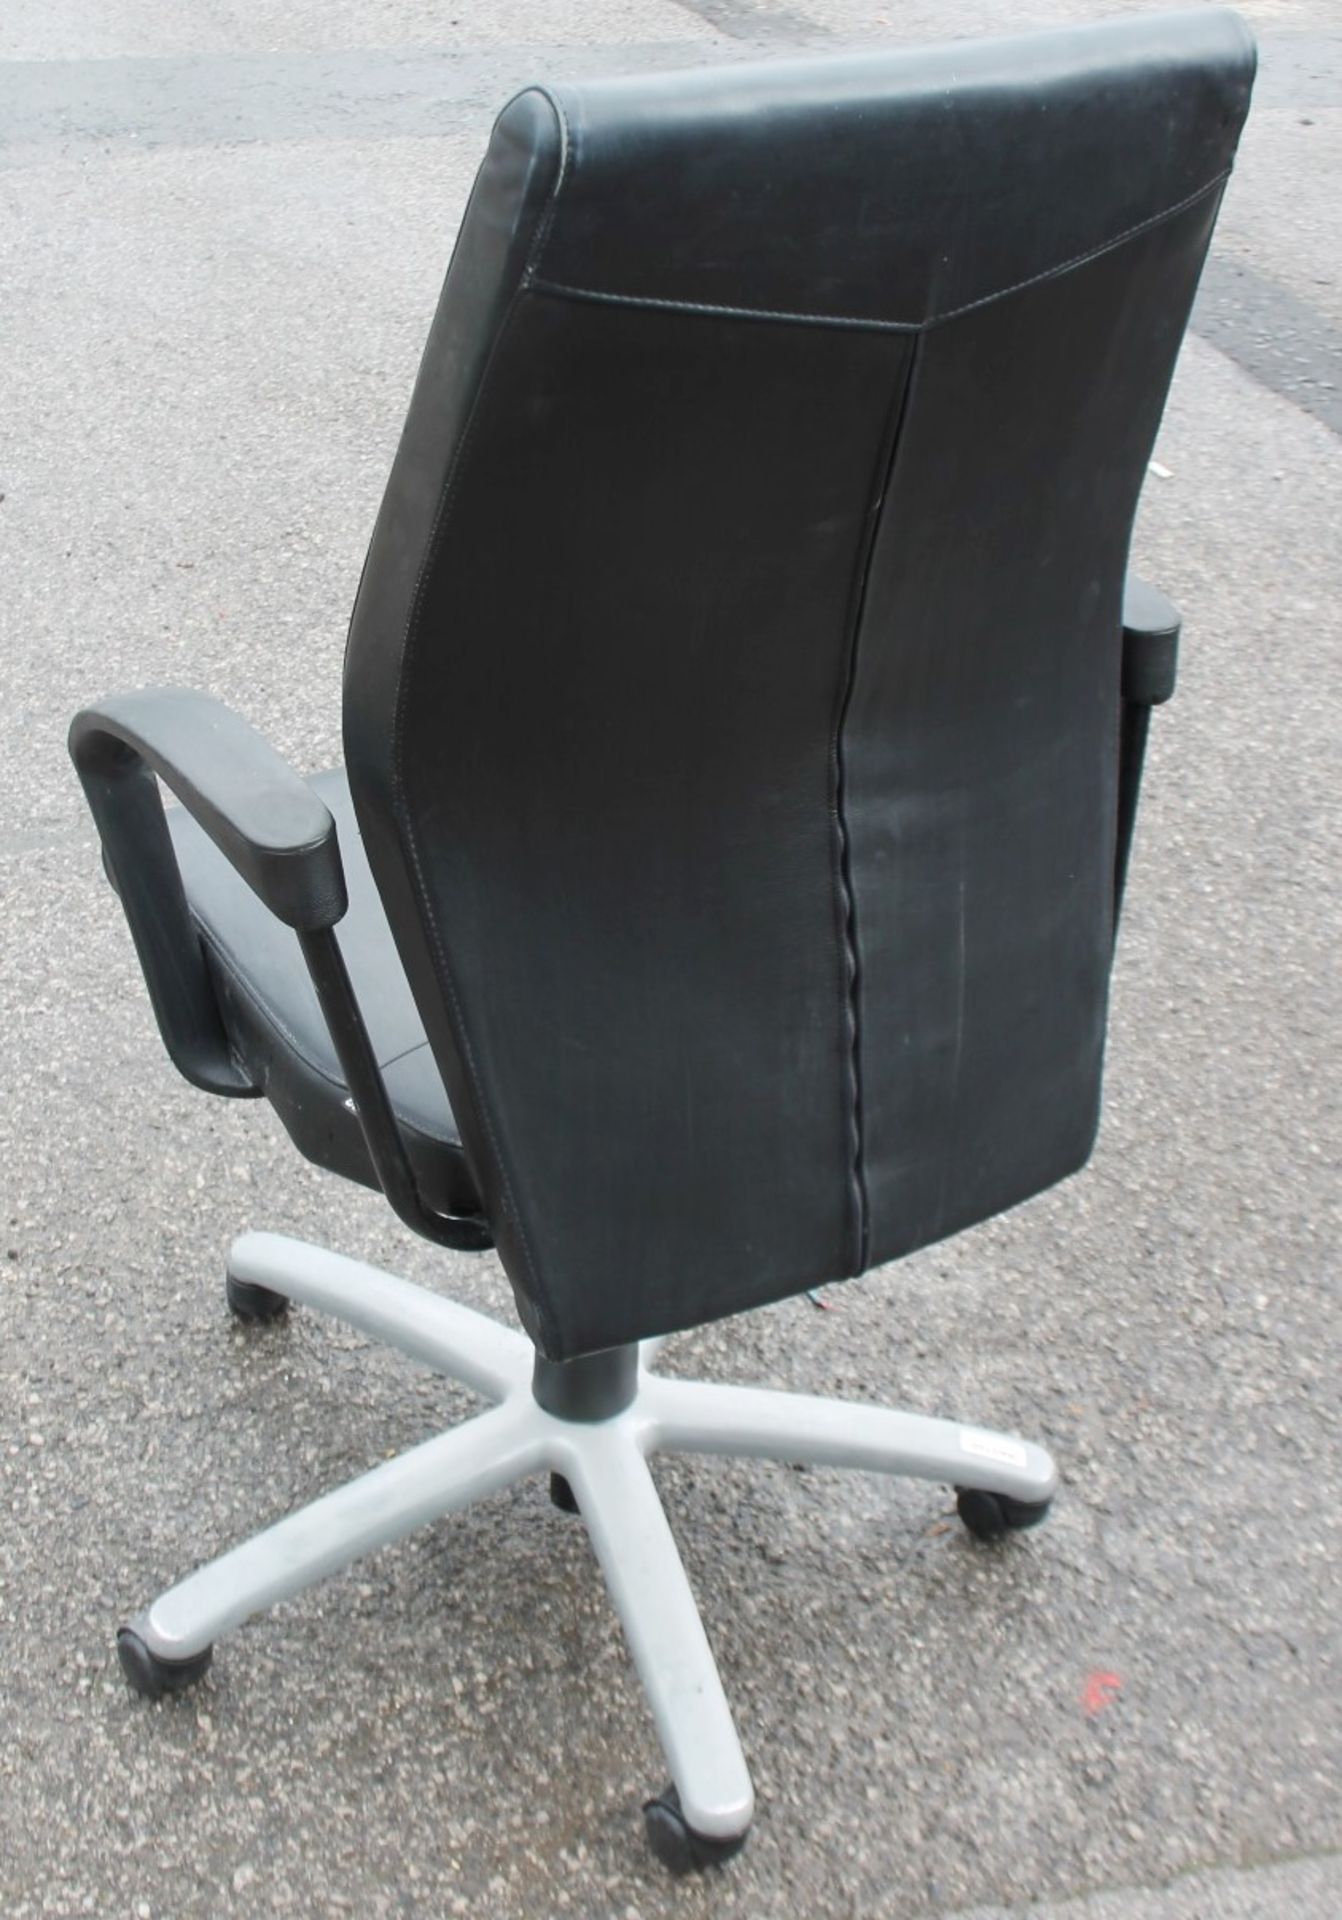 1 x VERCO Branded Gas Lift Swivel Chair Upholstered In A Black Faux Leather - Removed From An - Image 5 of 5